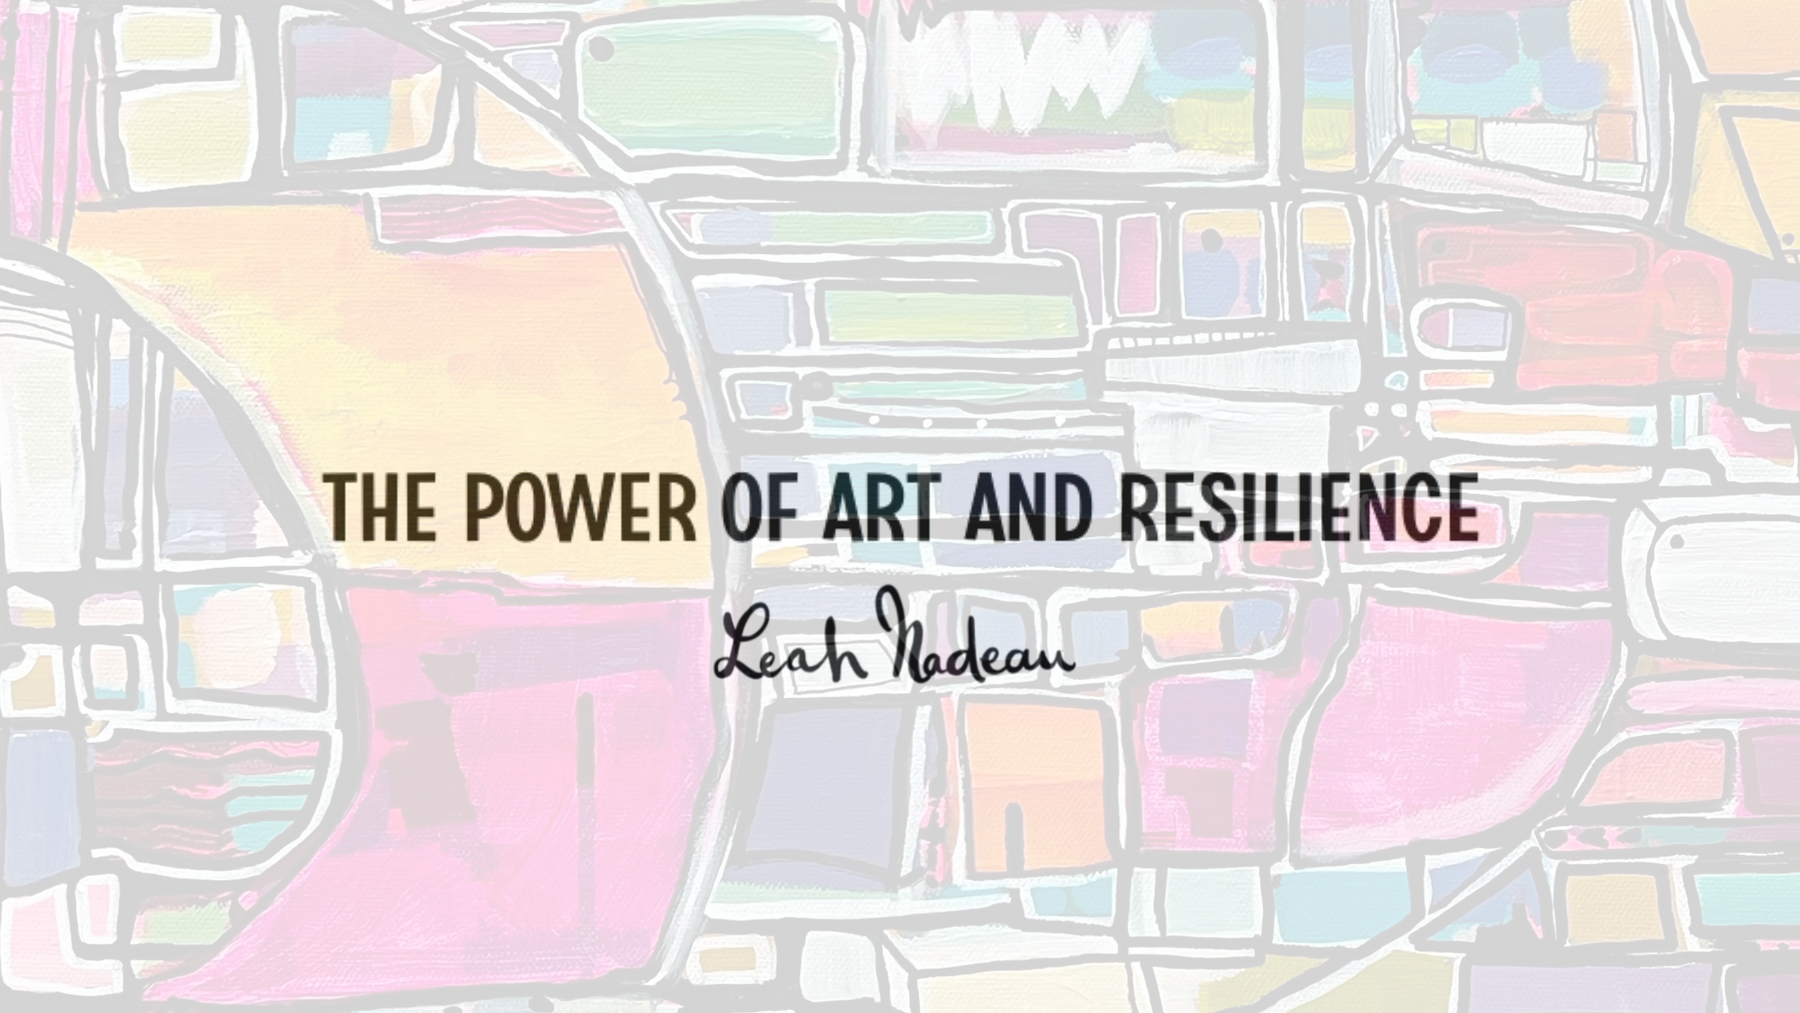 The Power of Art and Resilience